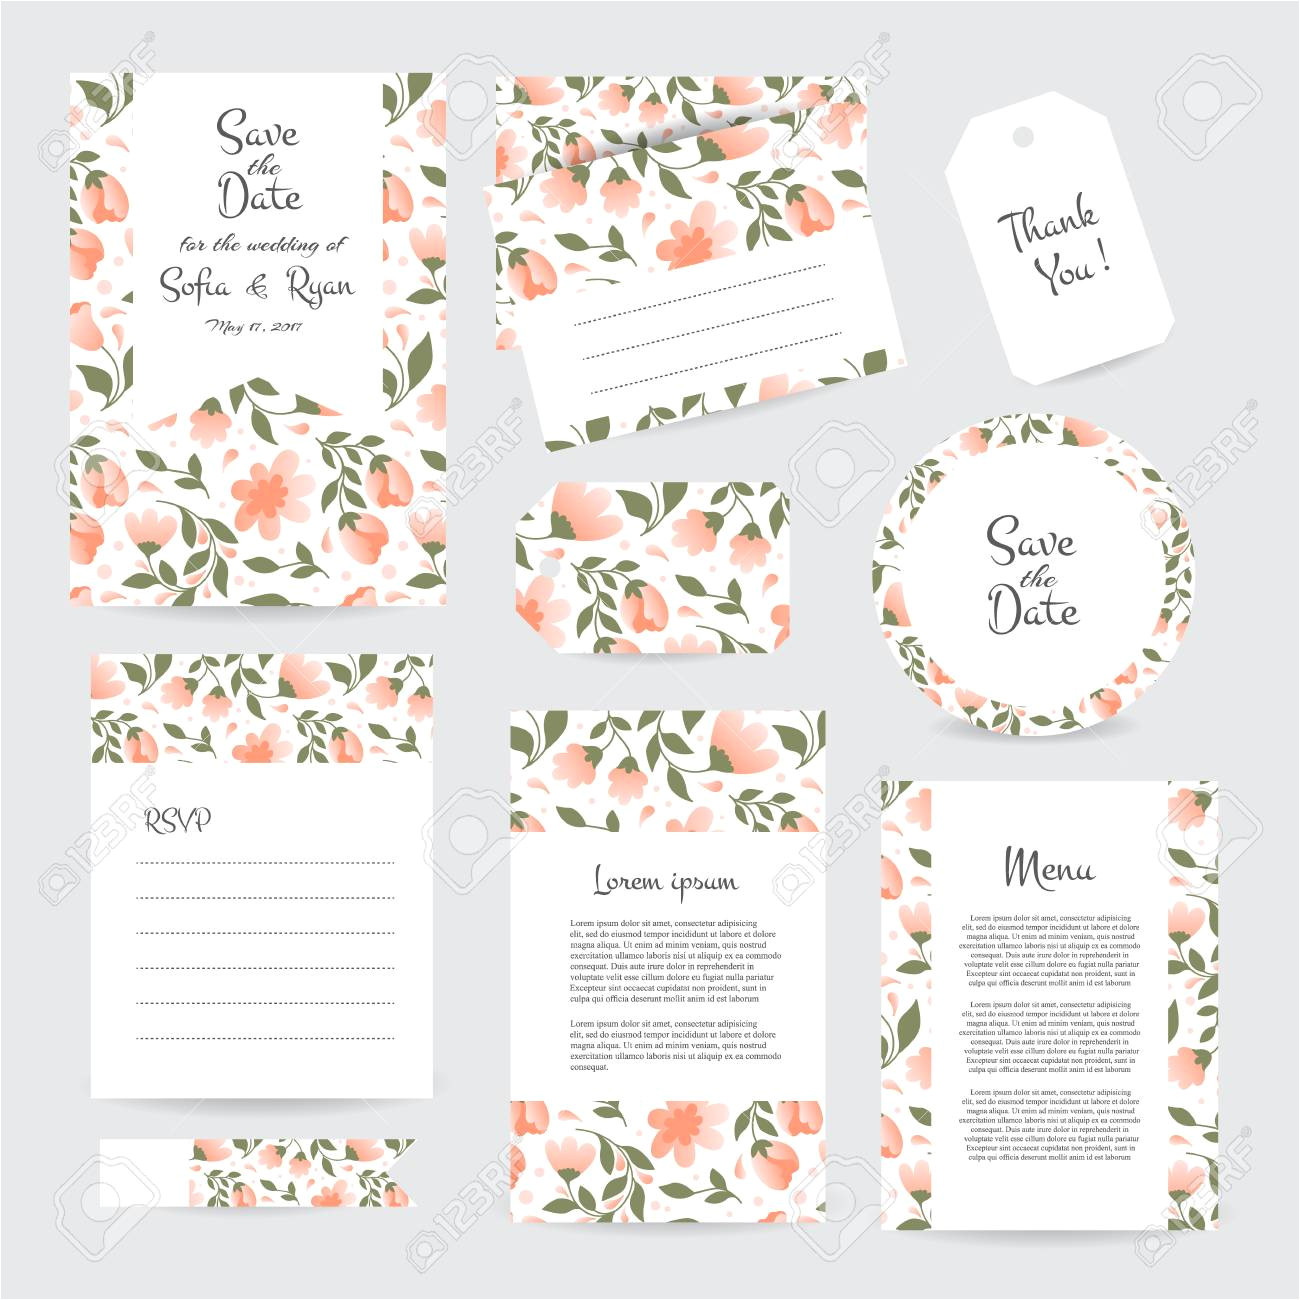 120958313 vector gentle wedding cards template with flower design invitation or save the date rsvp menu and th jpg